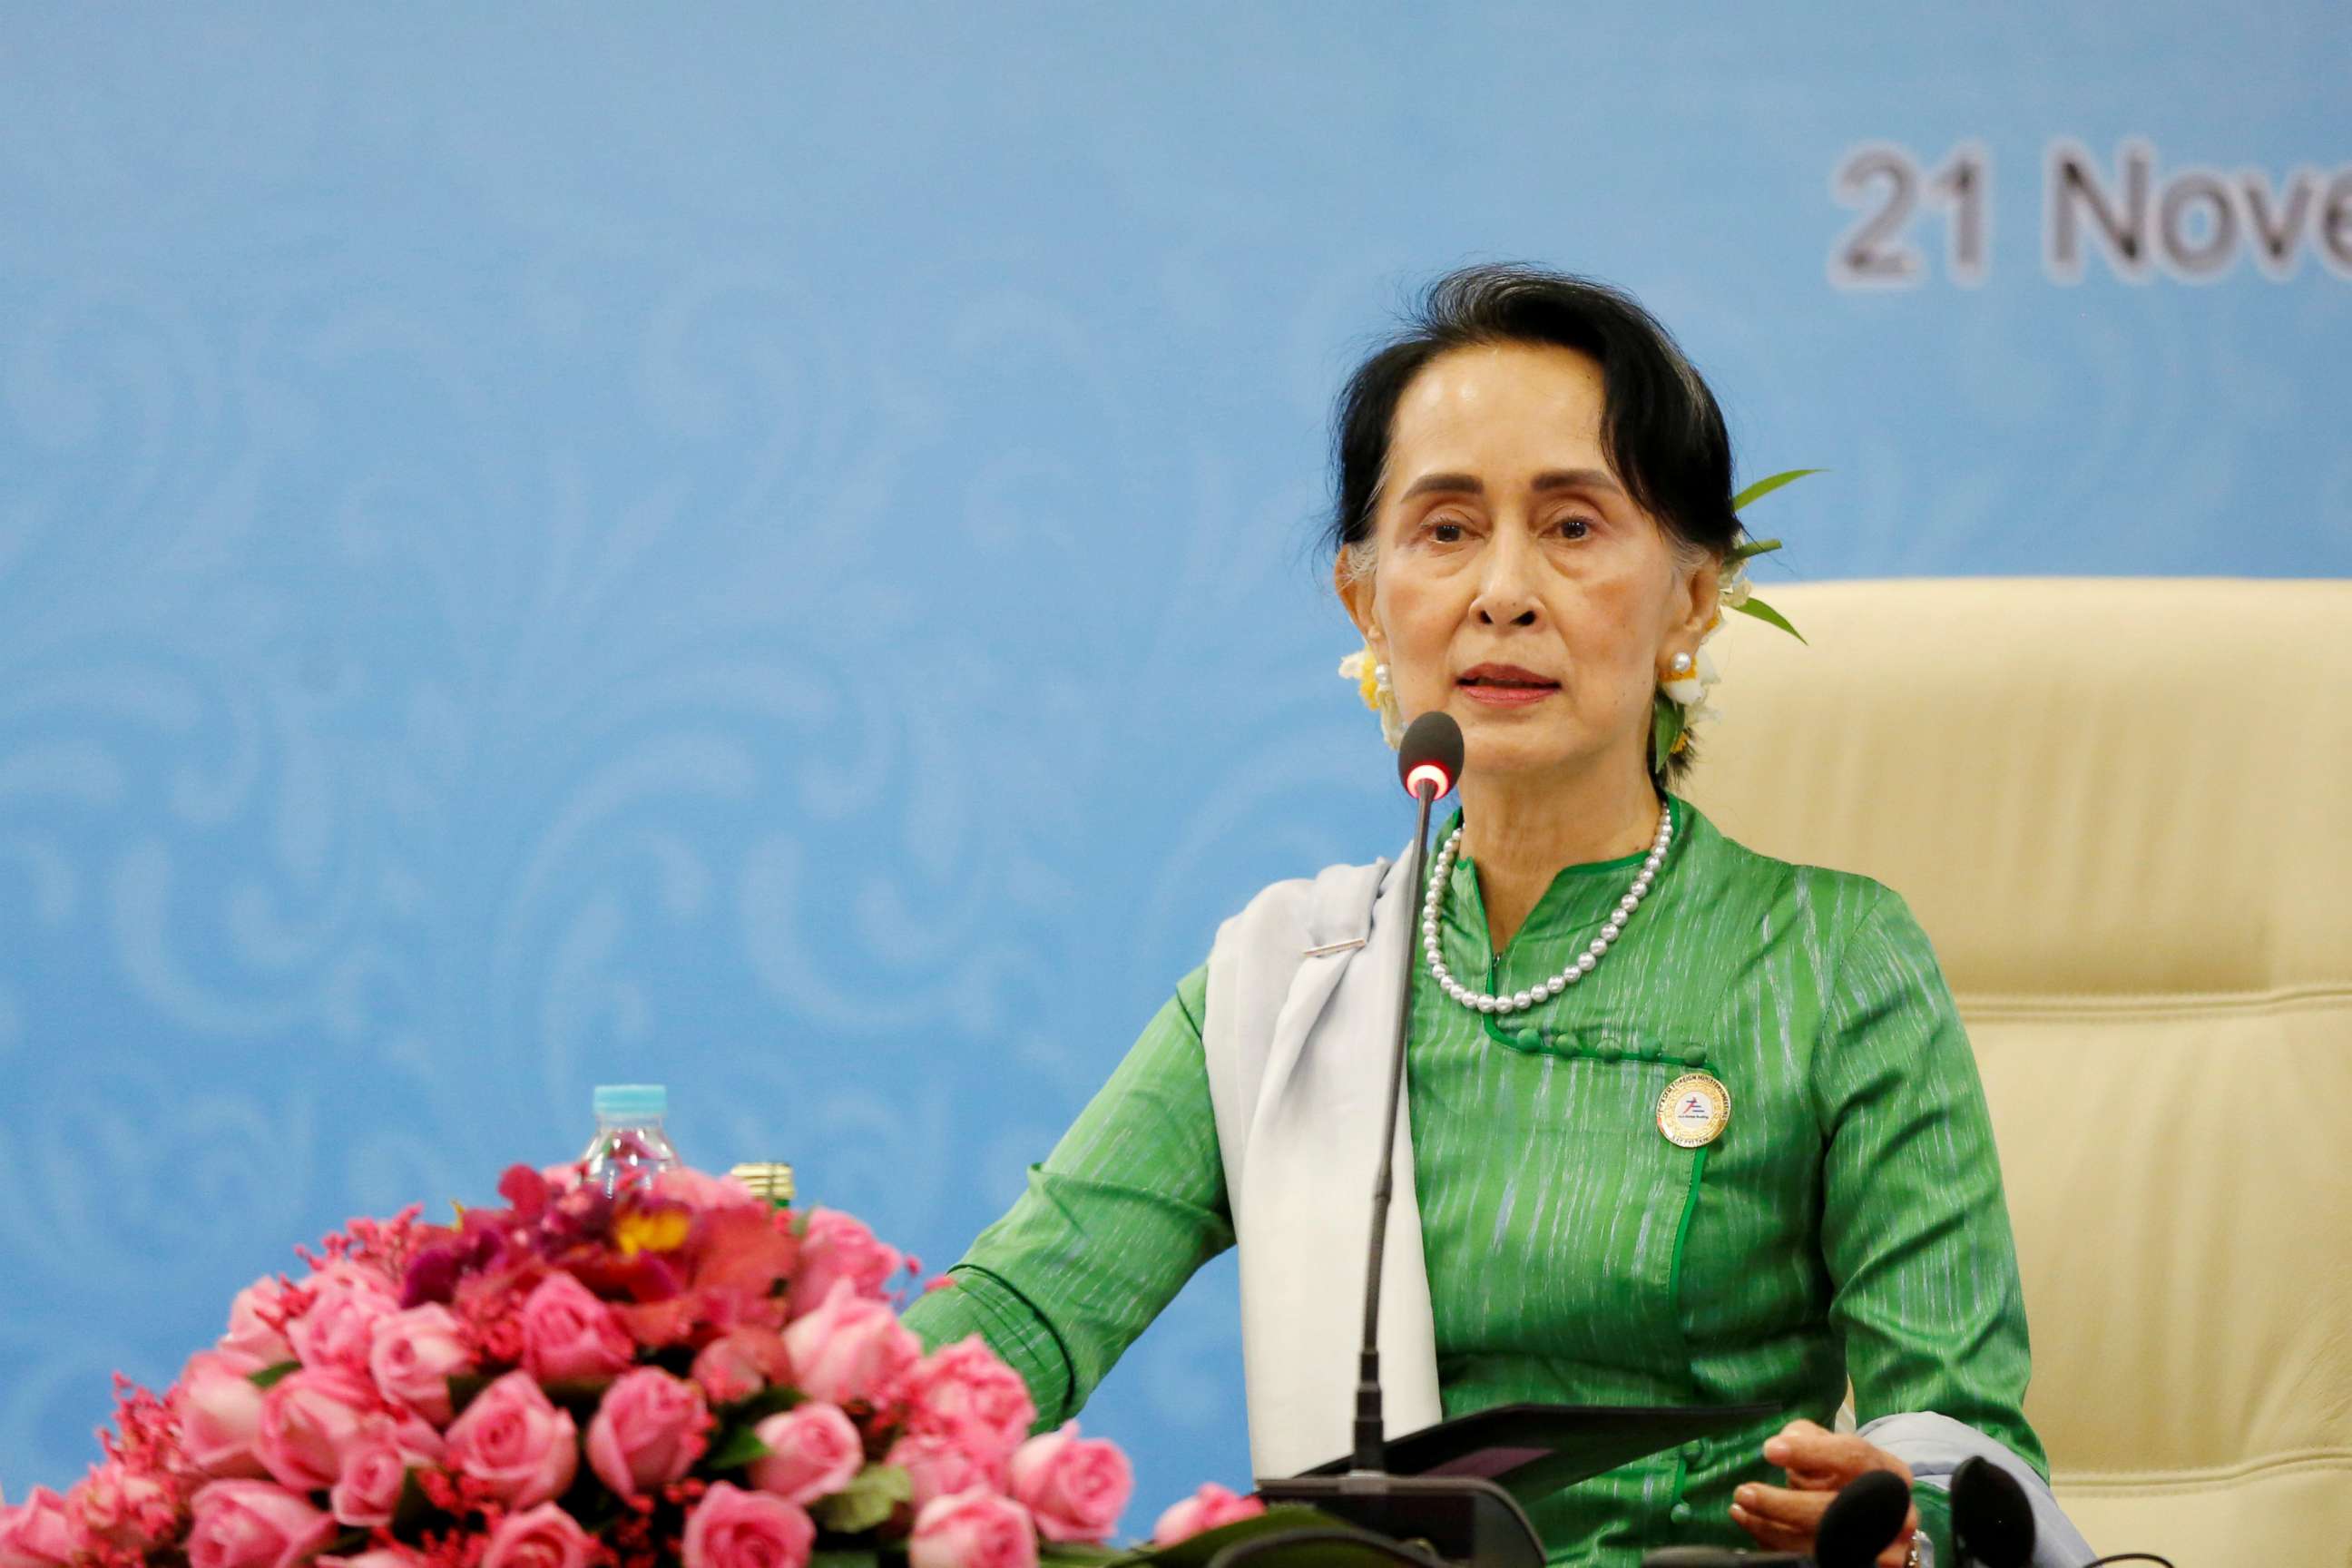 PHOTO: Myanmar State Counselor Aung San Suu Kyi speaks during a news conference at the Asia Europe Foreign Ministers (ASEM) in Naypyitaw, Myanmar, Nov. 21, 2017. 